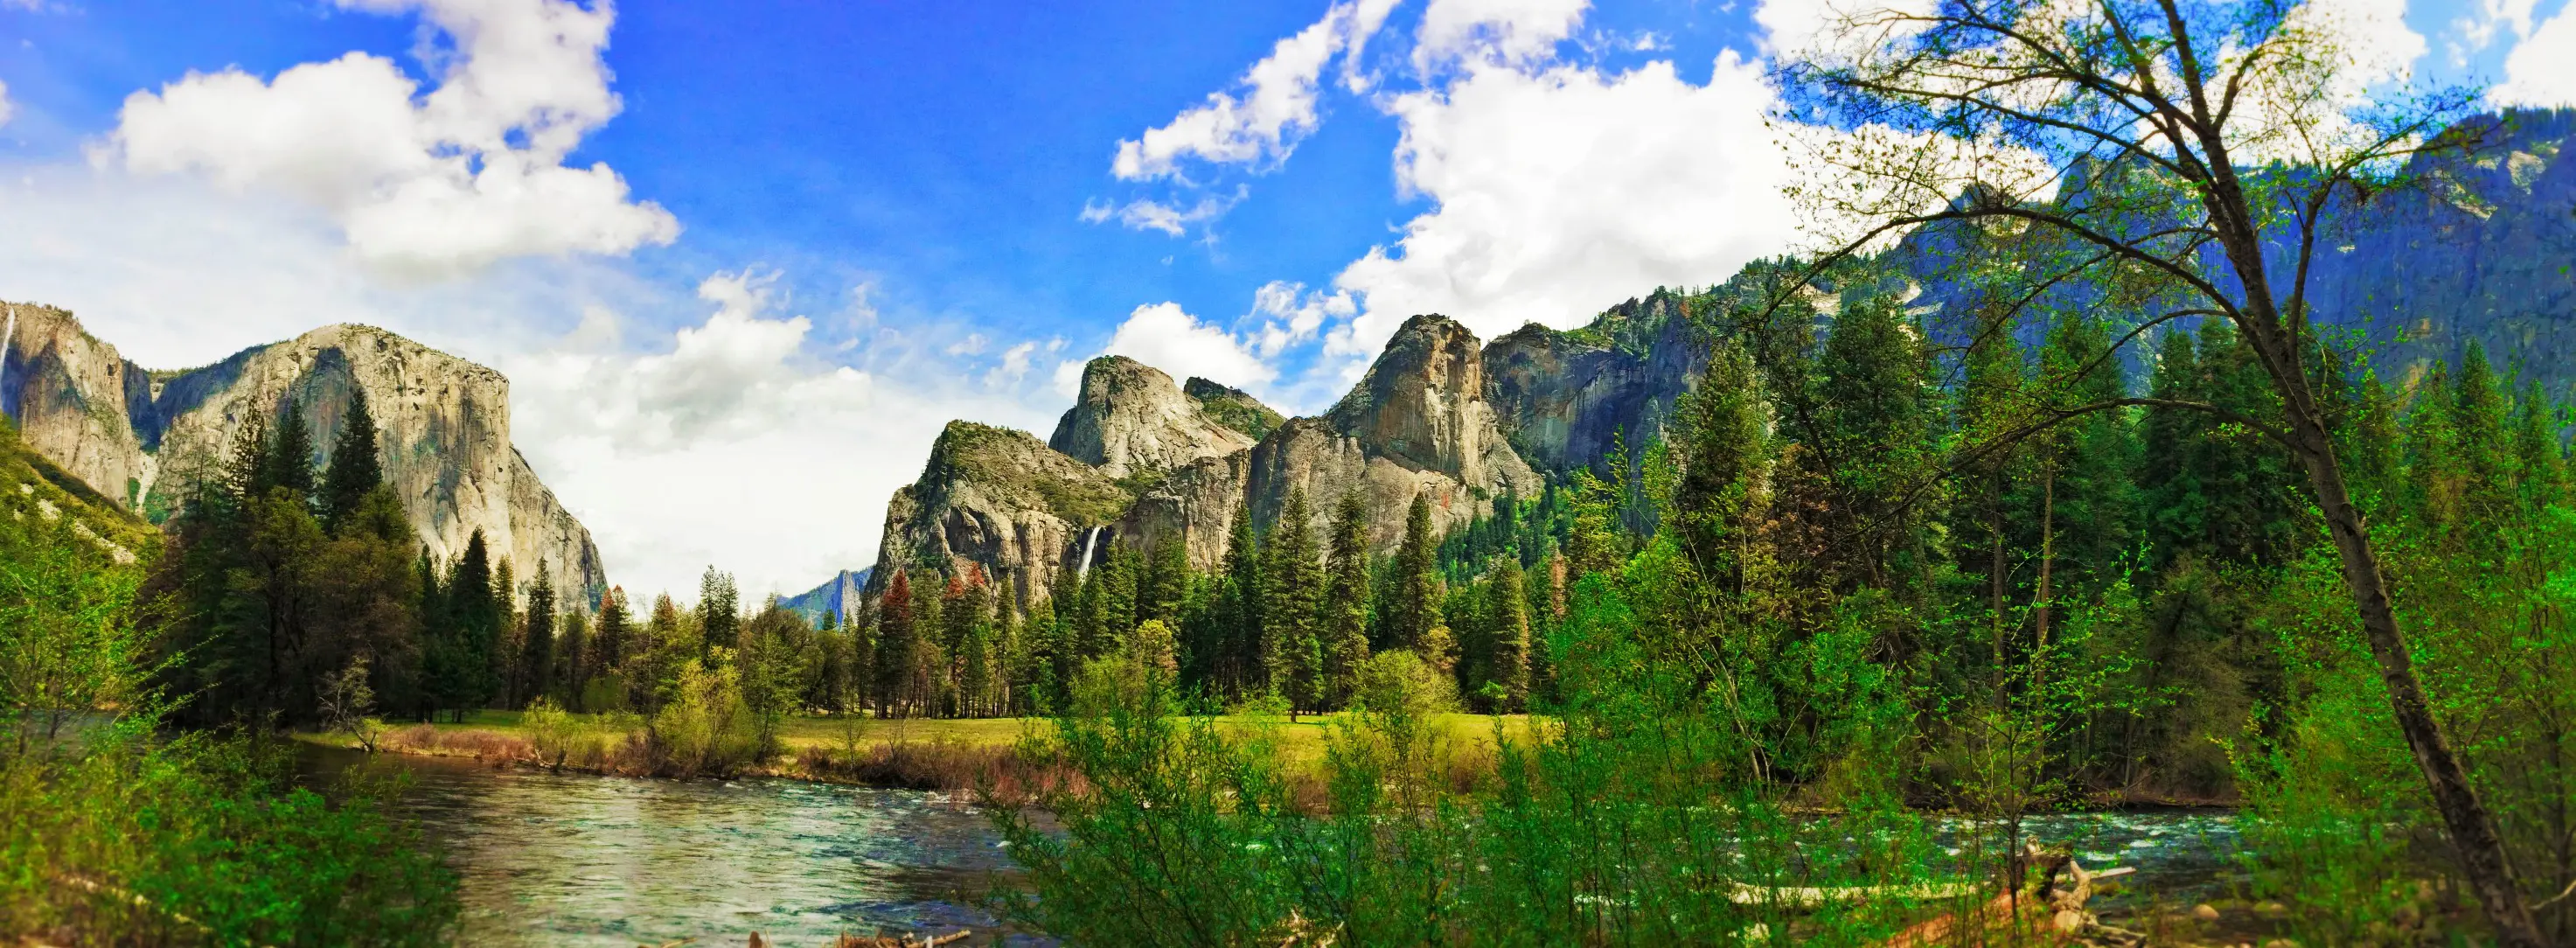 Yosemite National Park in California is a great destination for experiencing the nature of the Sierra Nevada mountains. Perfect for family travel, from camping to lodges, hiking to guided tours. 2traveldads.com